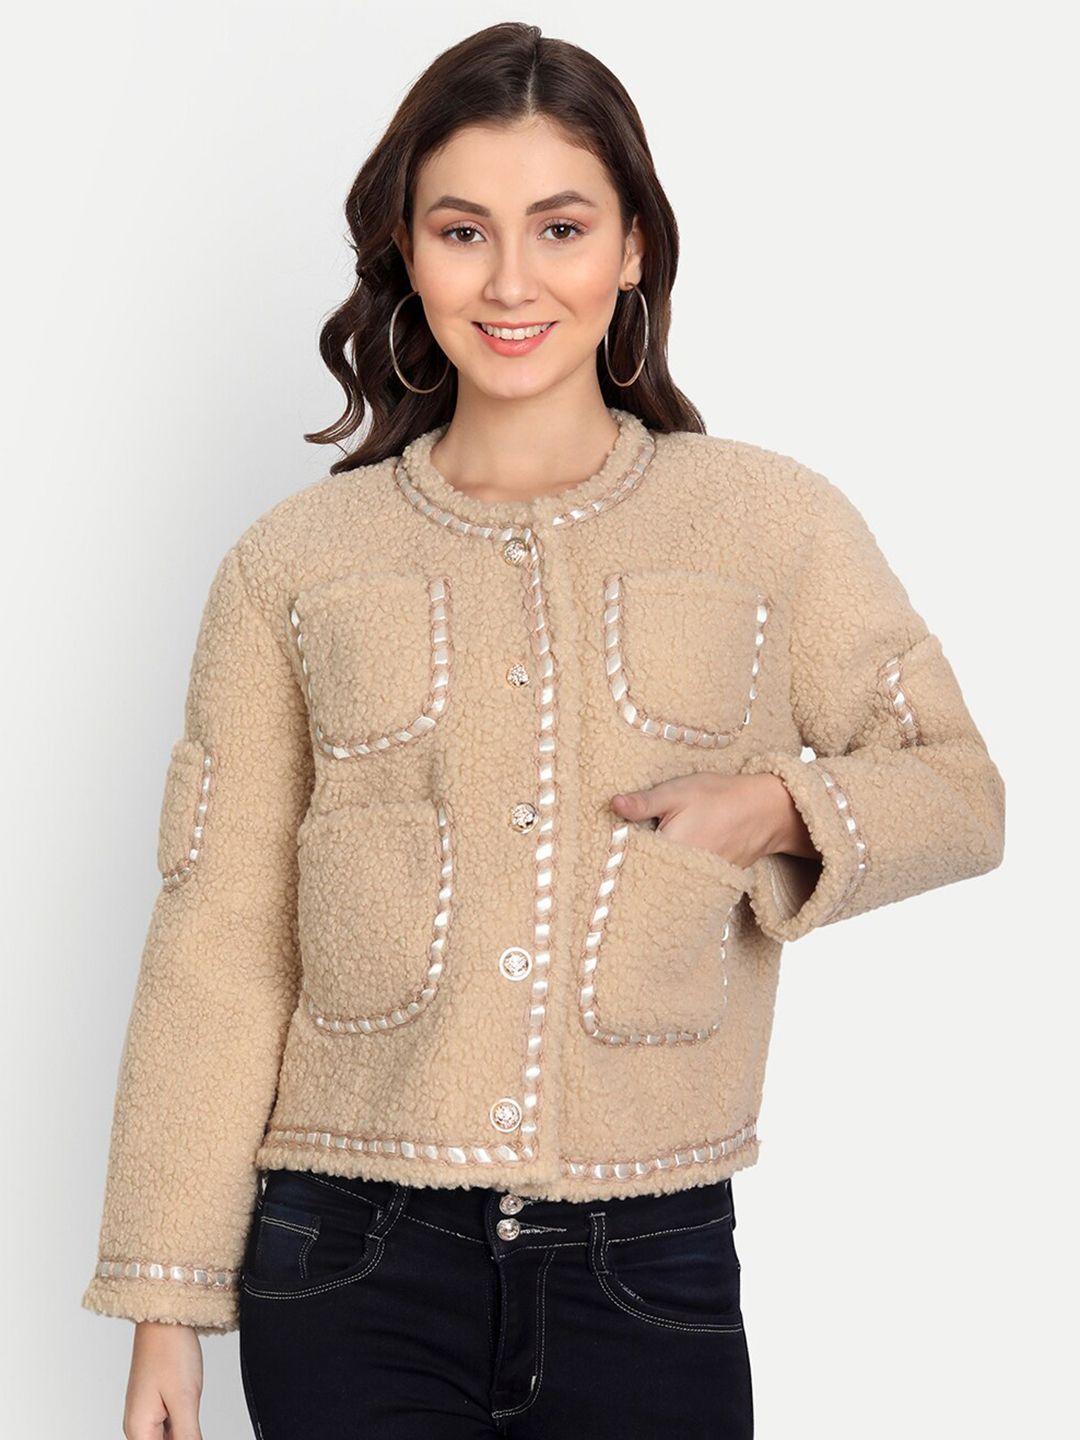 iki chic women beige & white cable knit cardigan sweater